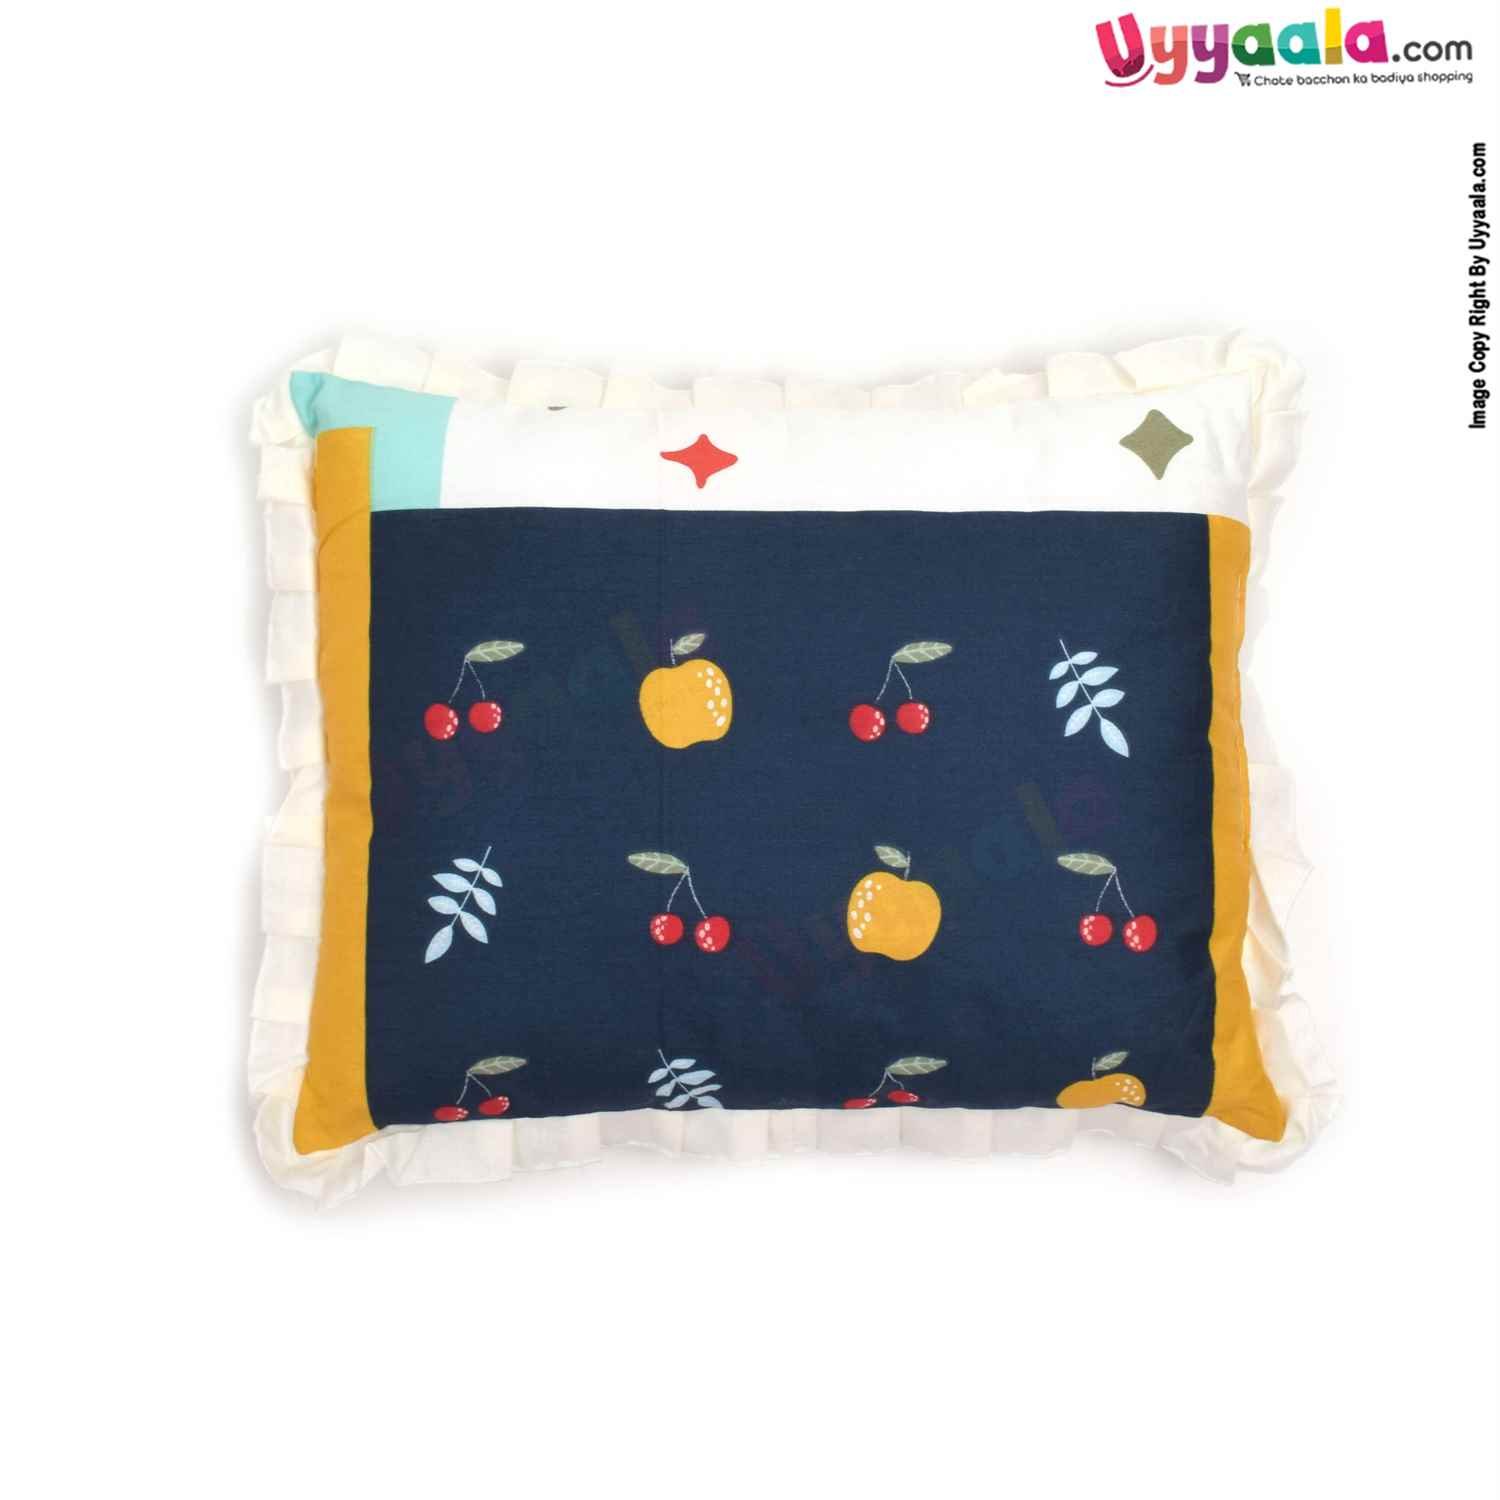 Cotton Pillow for babies